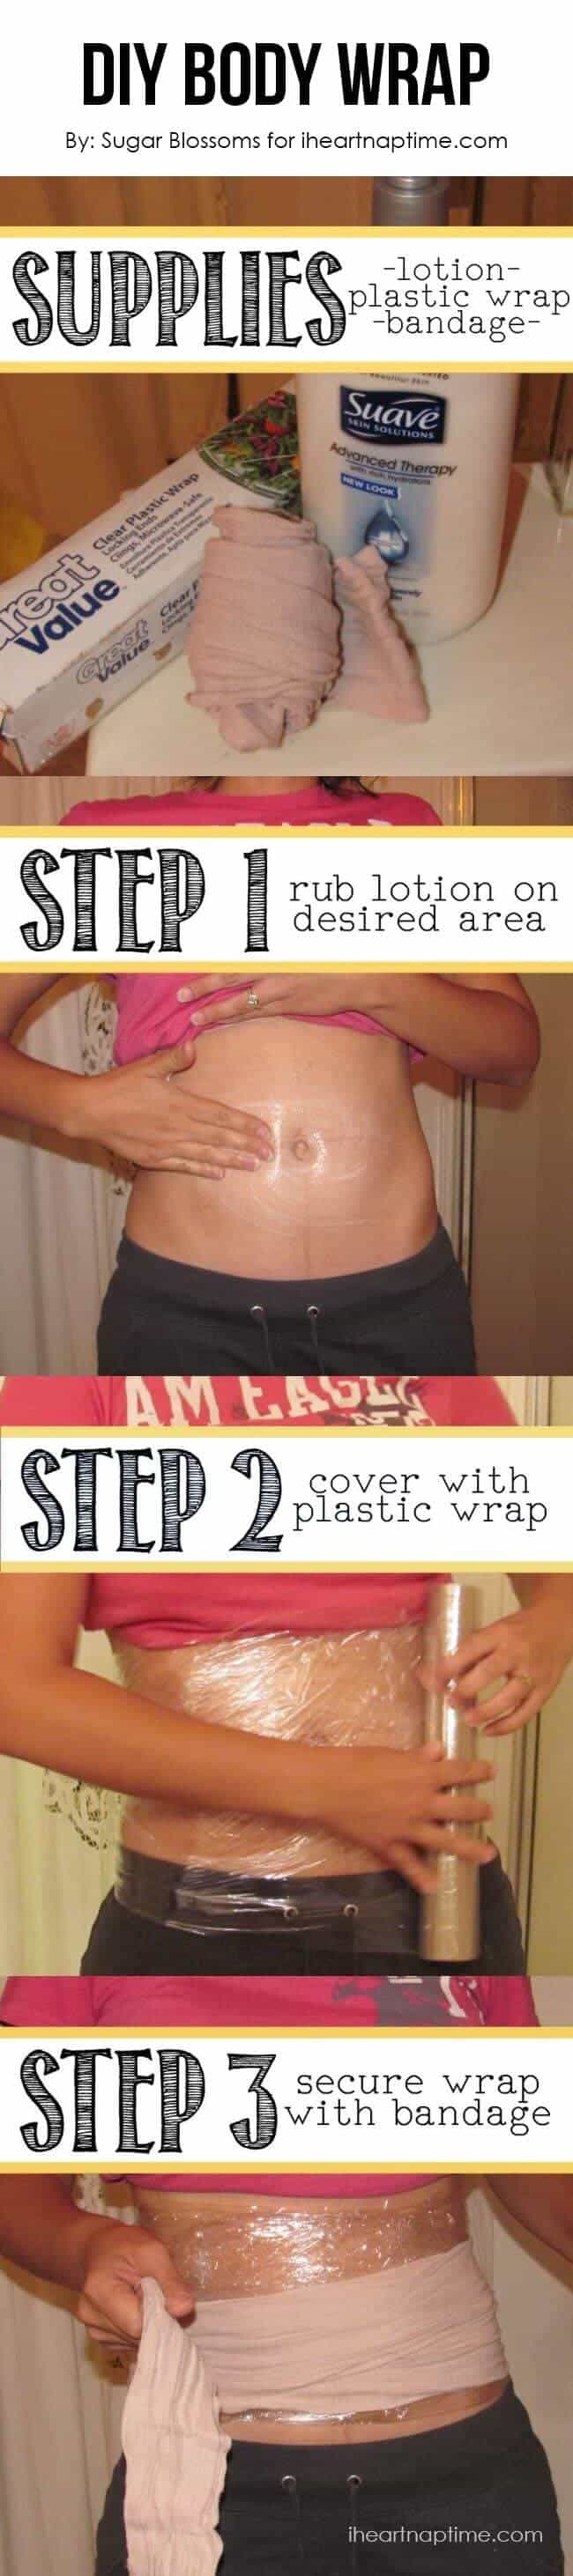 diy body wrap - lose up to 1 inch over night! - i heart nap time